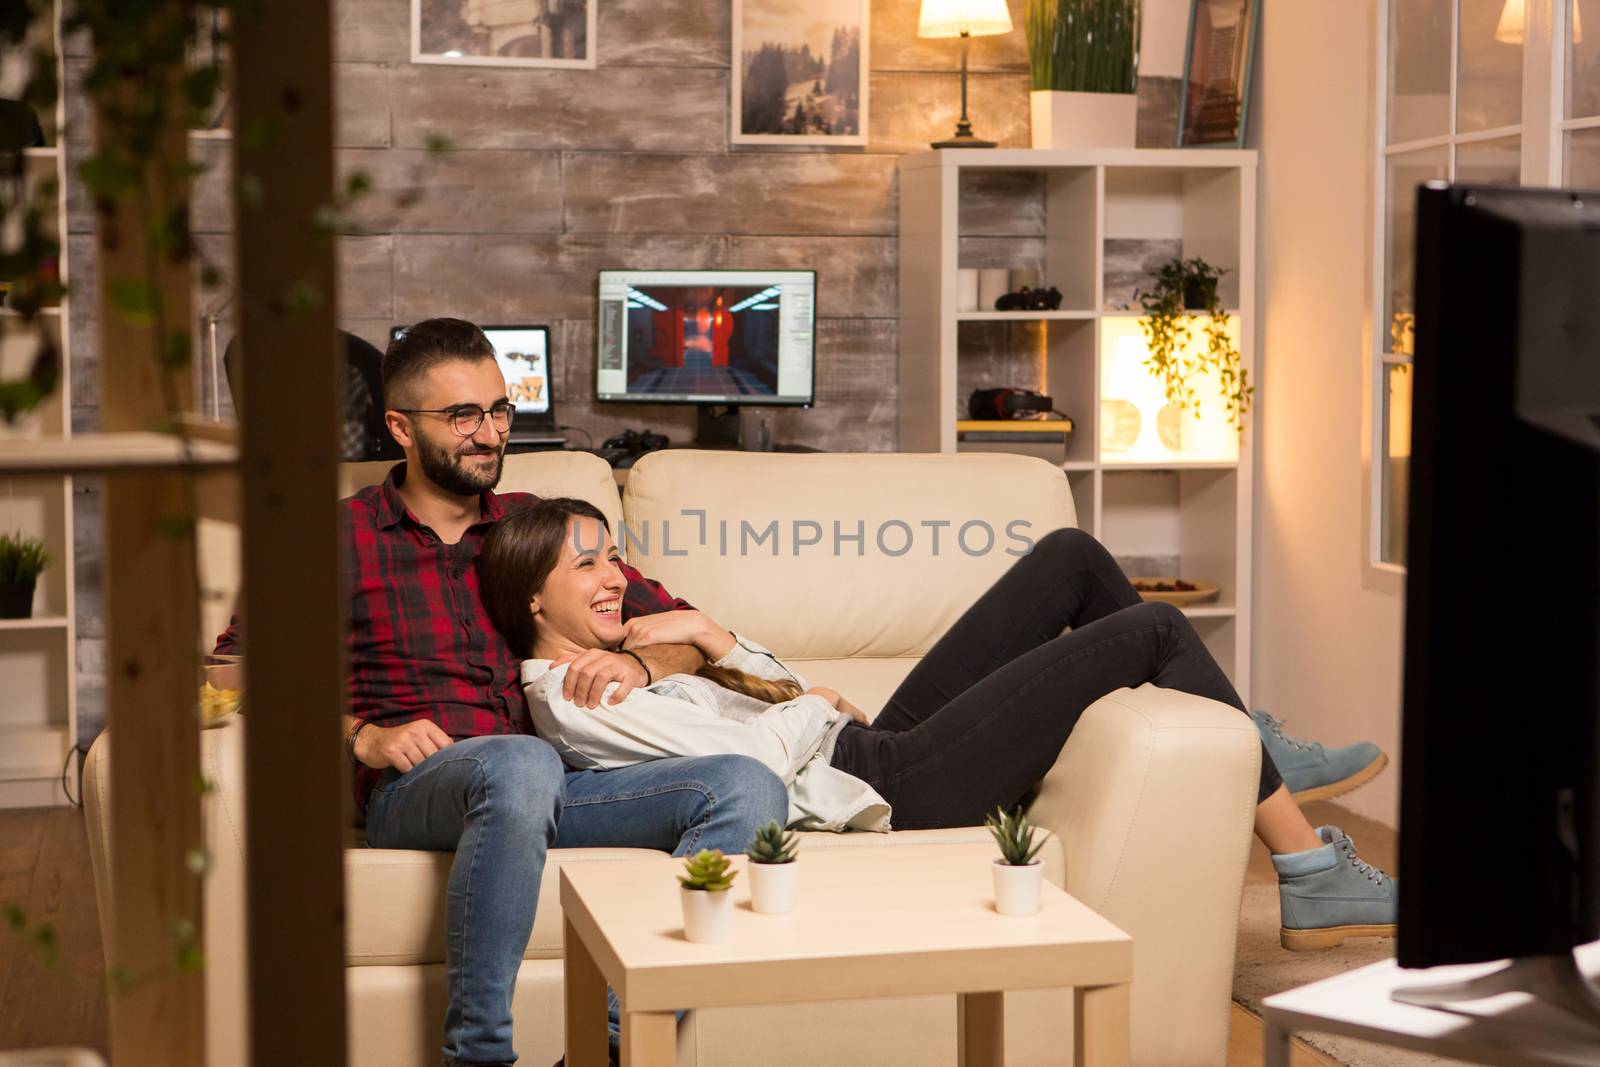 Lovely young couple relaxing on couch and watching a movie on tv at night